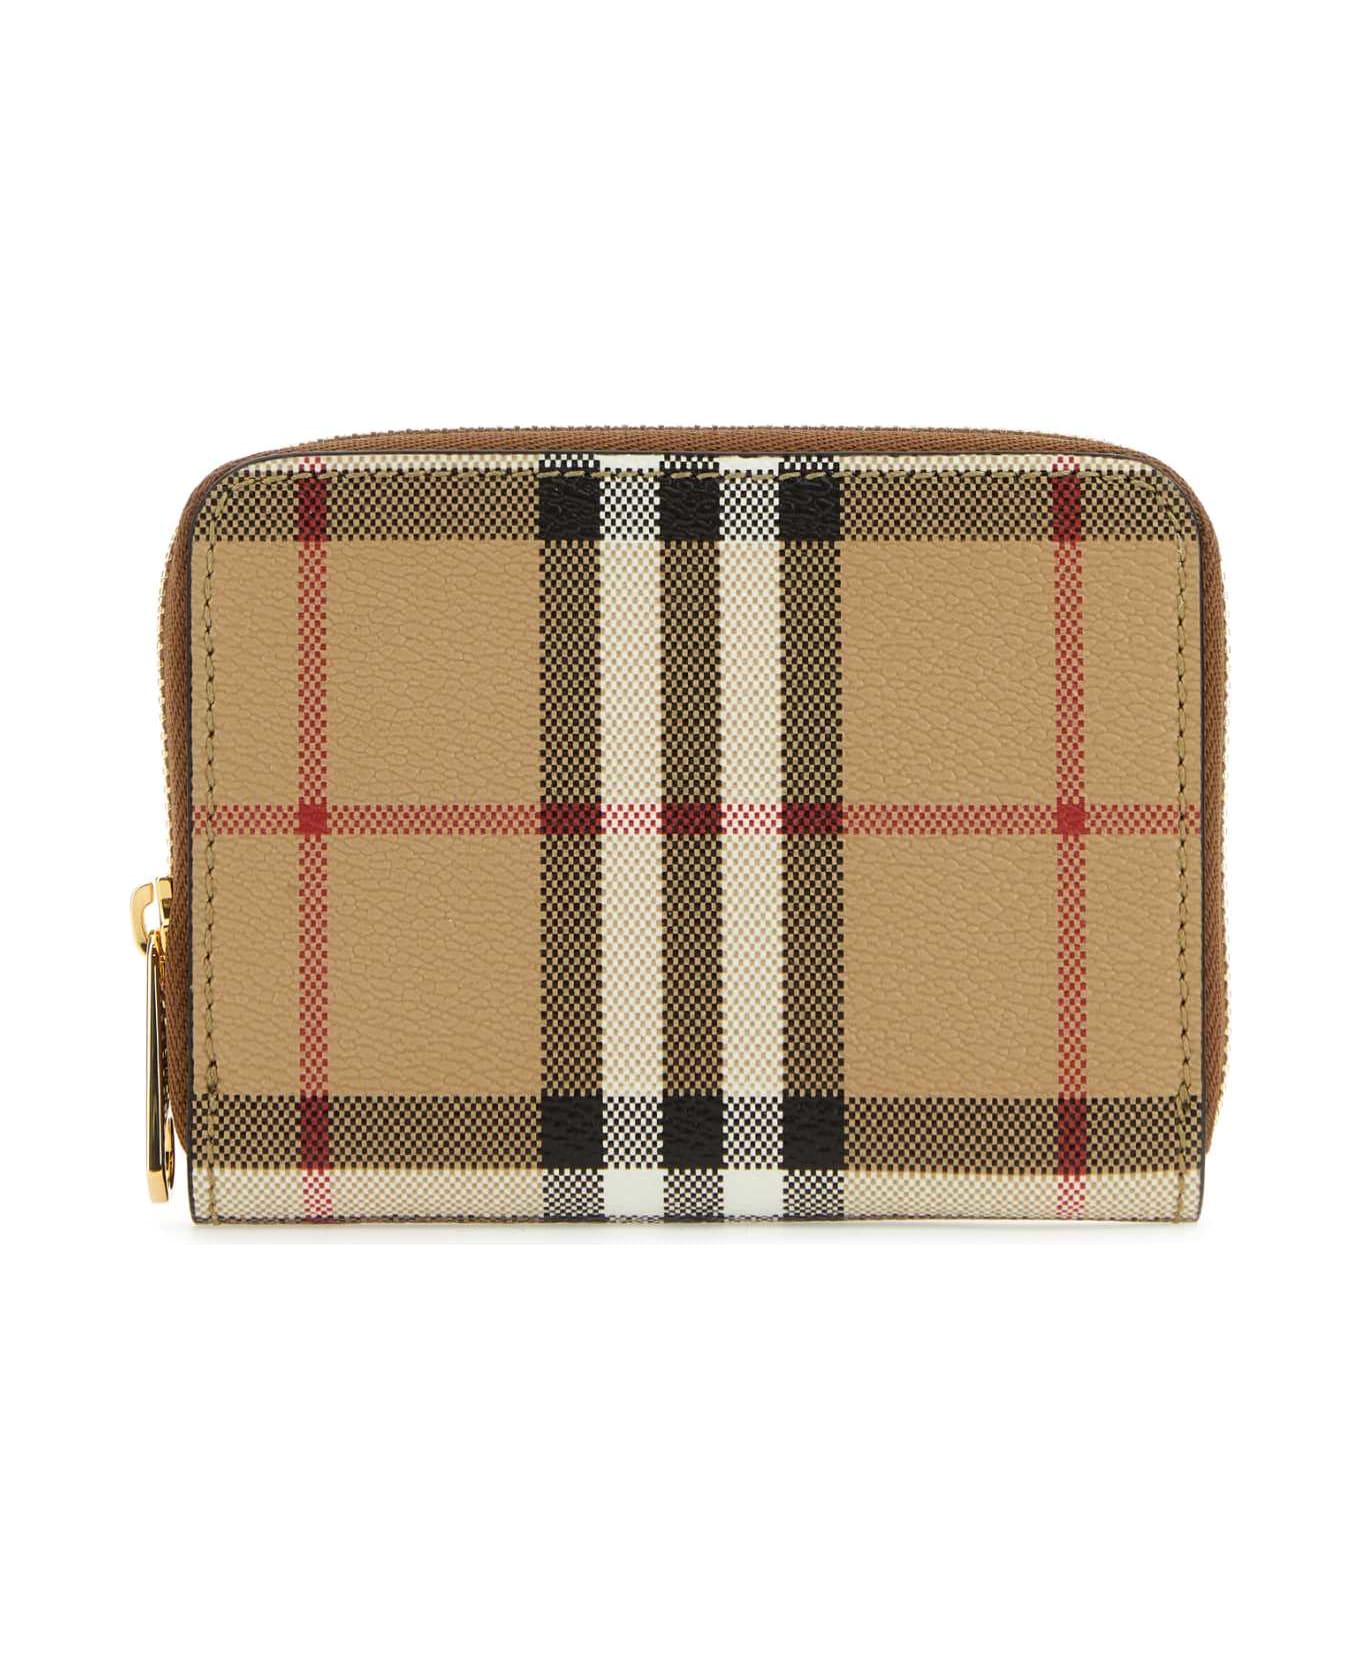 Burberry Printed E-canvas Wallet - VINTCHCKBRIRBROWN